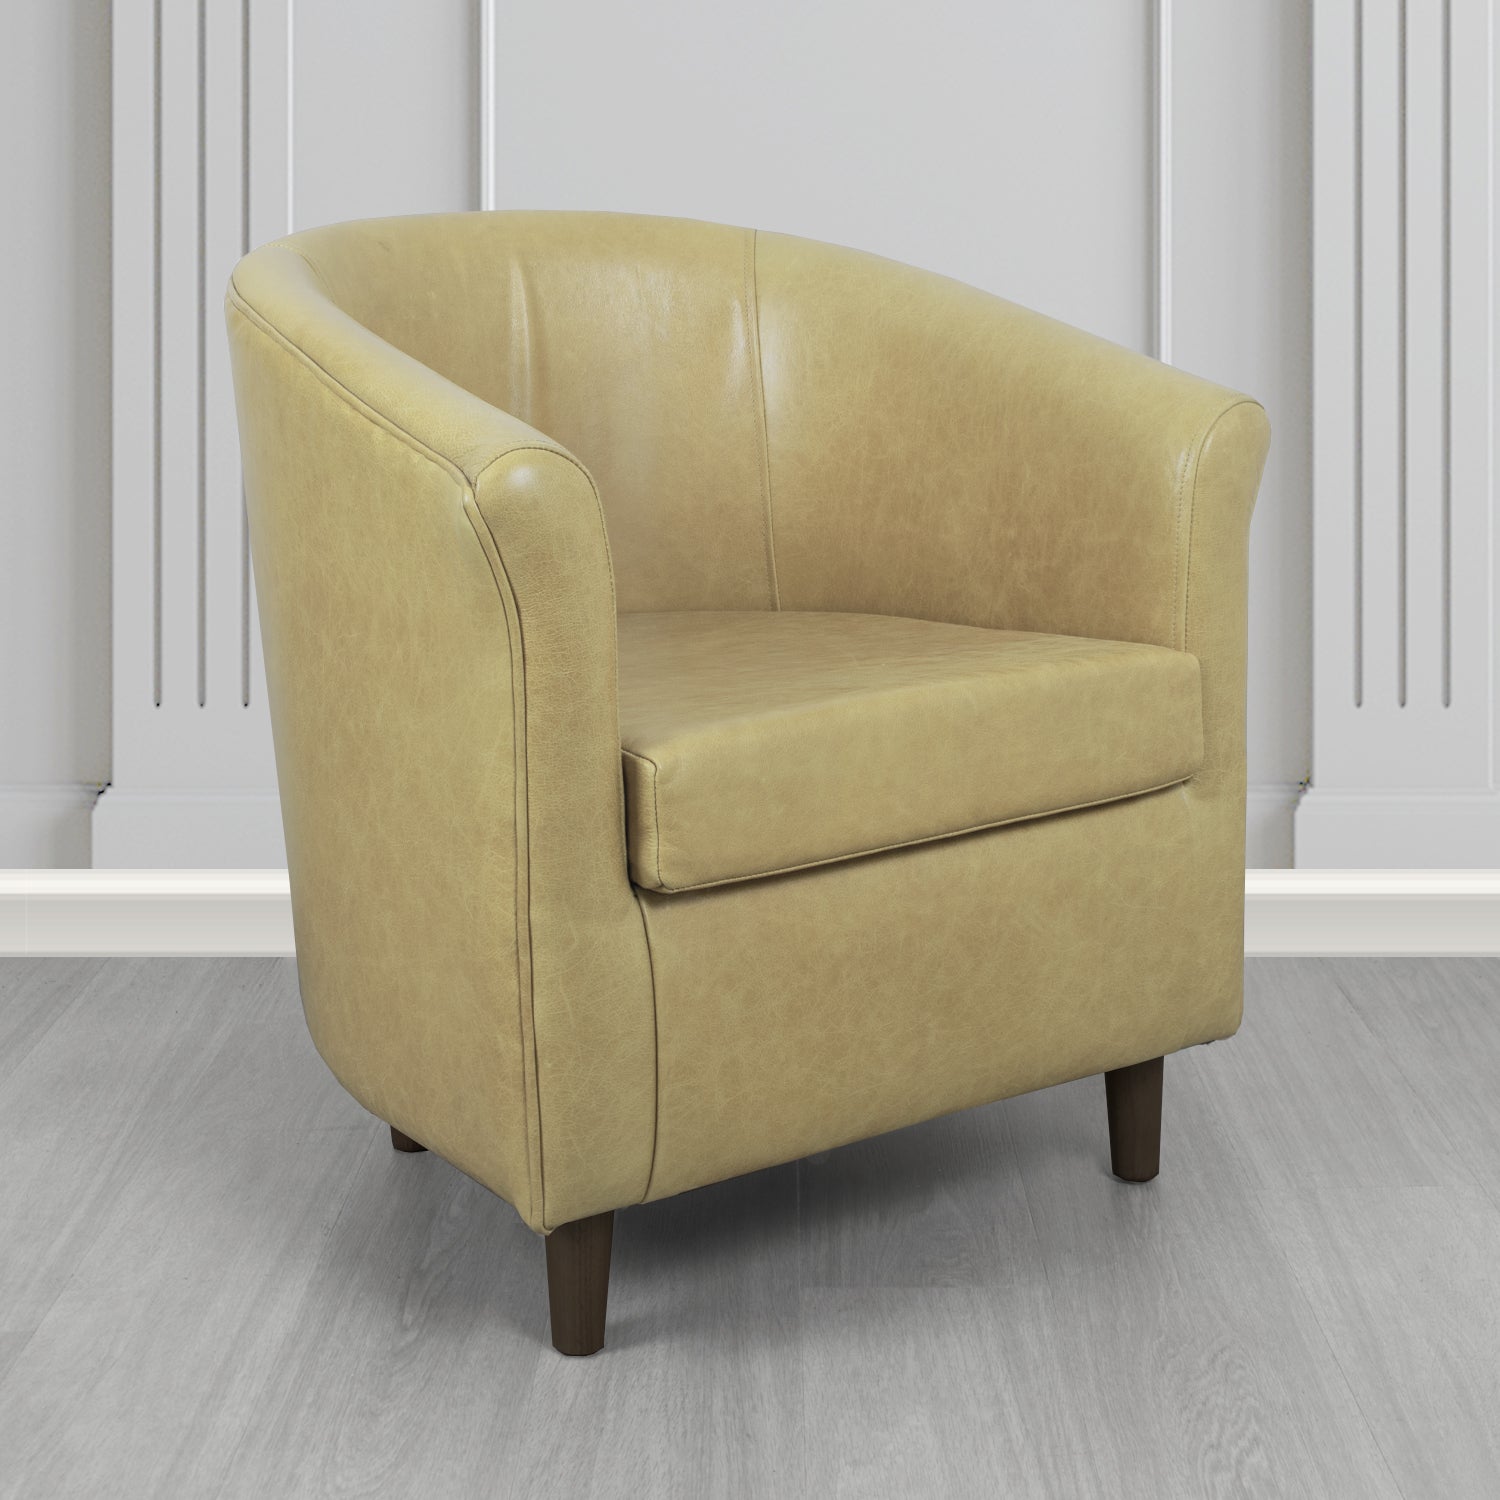 Tuscany Tub Chair in Crib 5 Old English Parchment Genuine Leather - The Tub Chair Shop